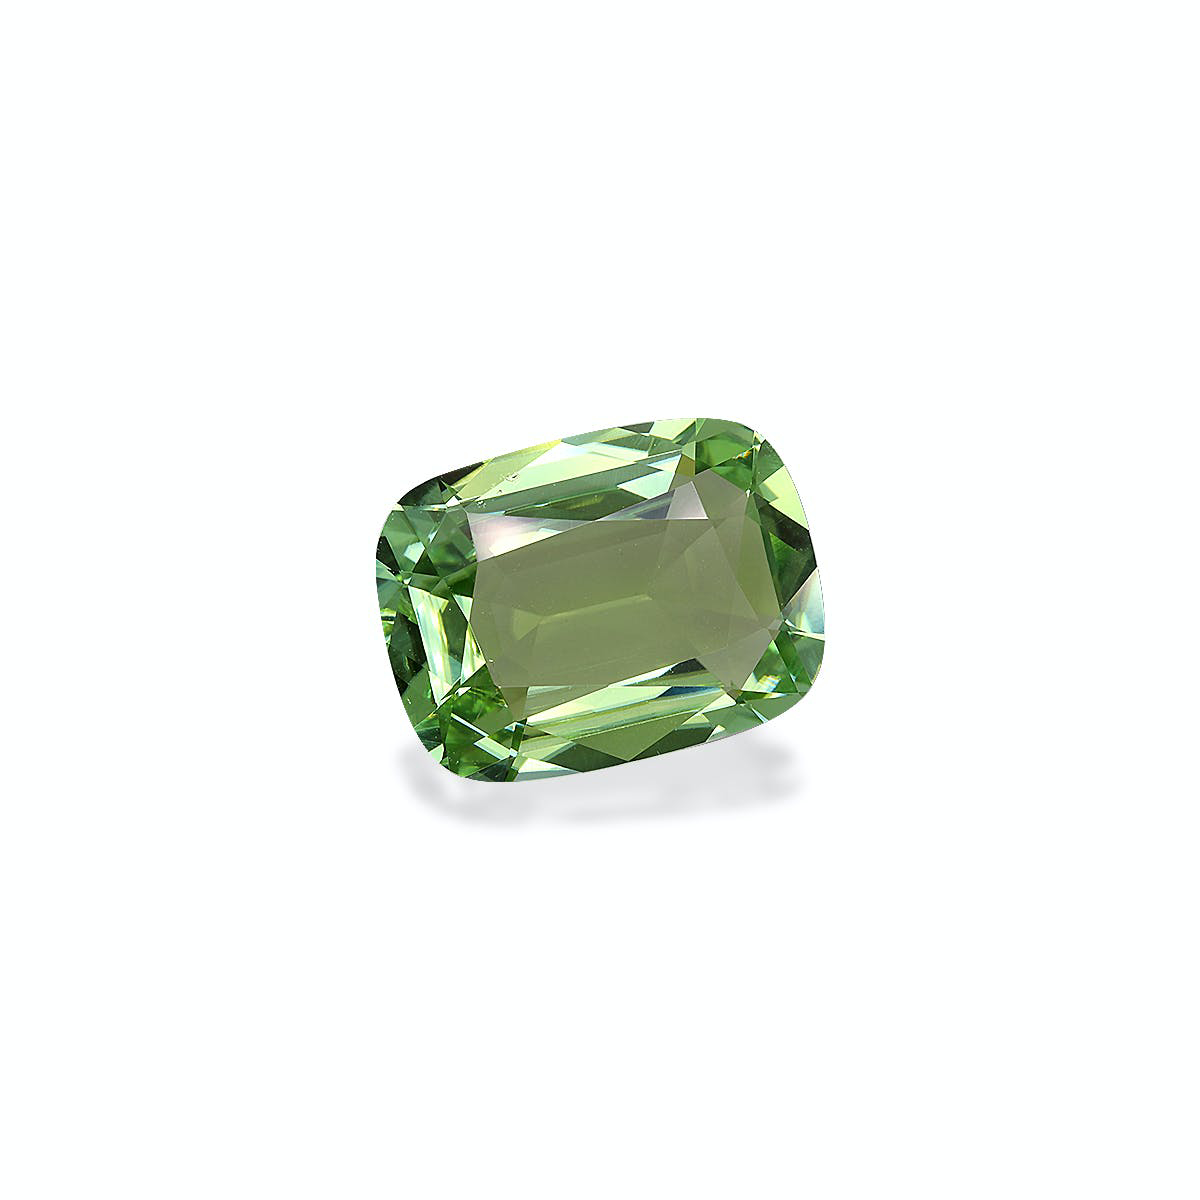 Picture of Pistachio Green Tourmaline 9.12ct (TG1614)